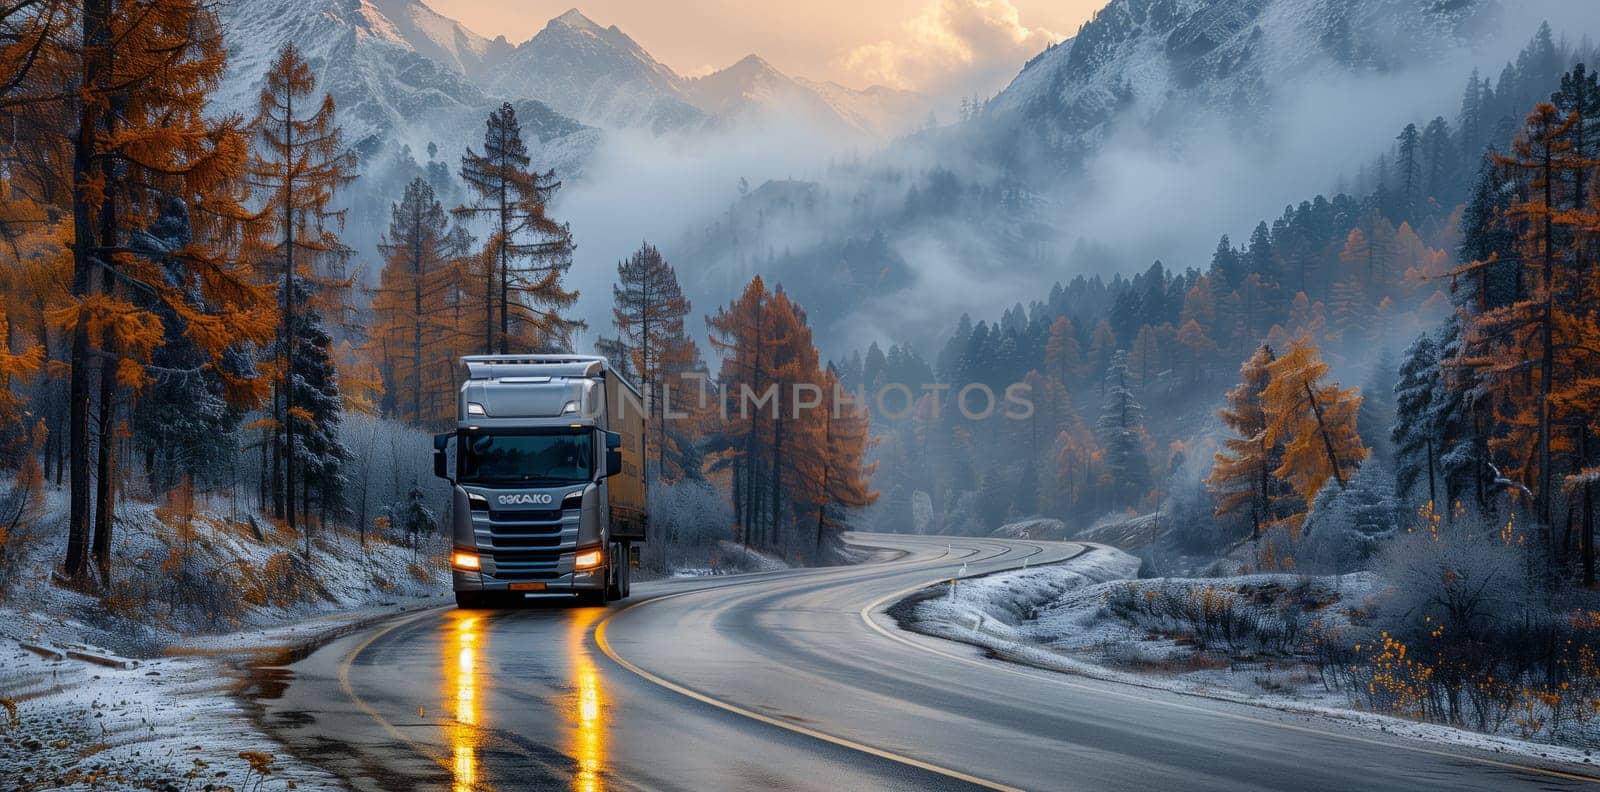 A vehicle is navigating a snowcovered mountain road lined with trees under cloudy skies